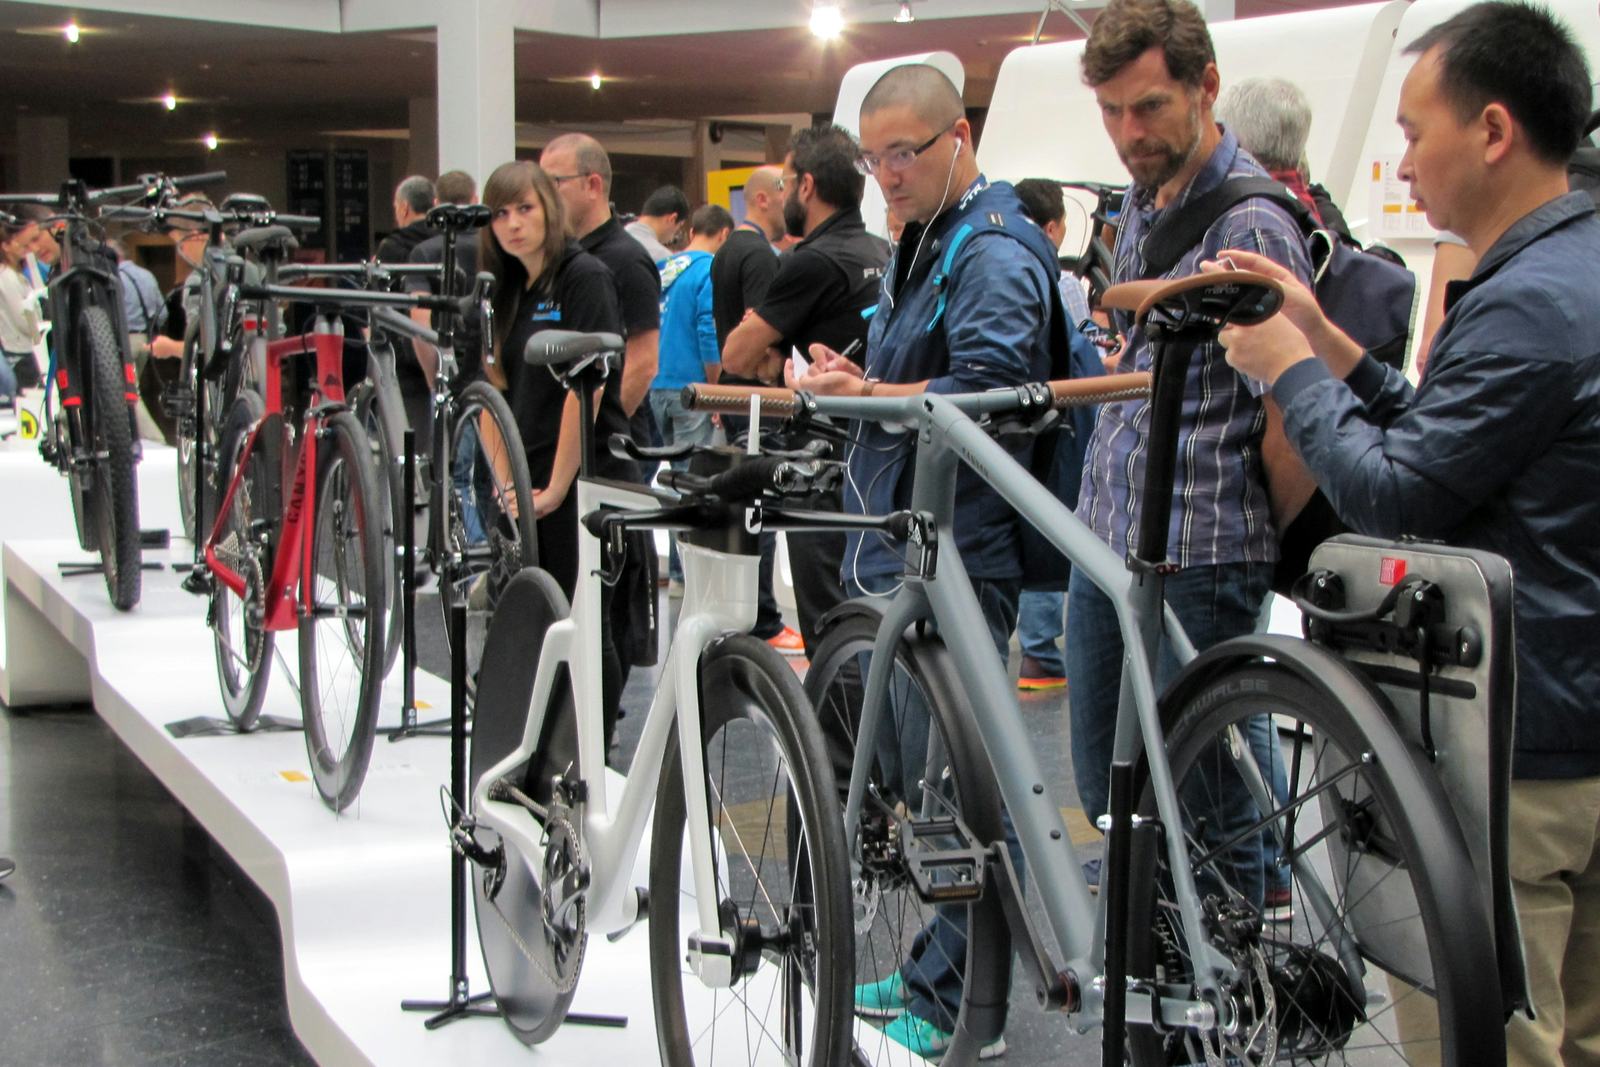 The presentation of the products that got a Eurobike Awards always attracts a lot of spectators at the West Entrance of the Eurobike venue. – Photo Bike Europe